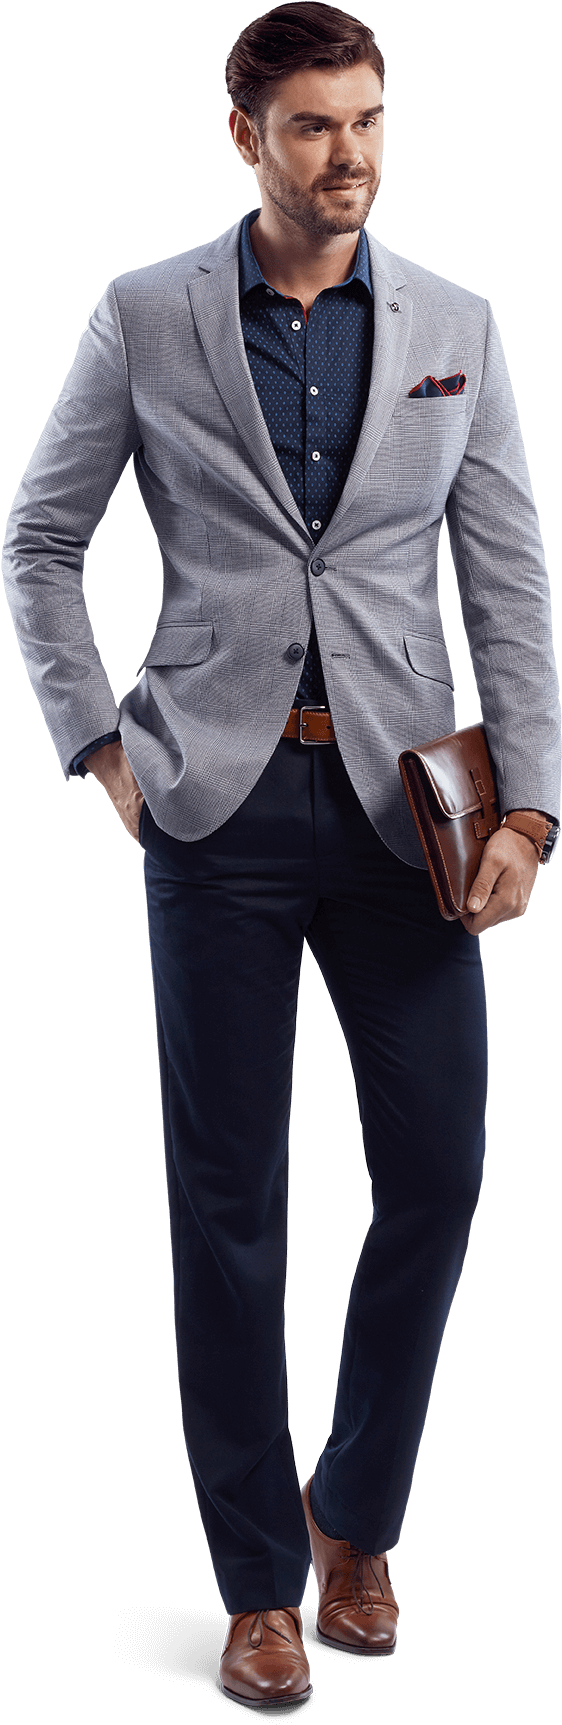 Stylish Business Casual Man PNG